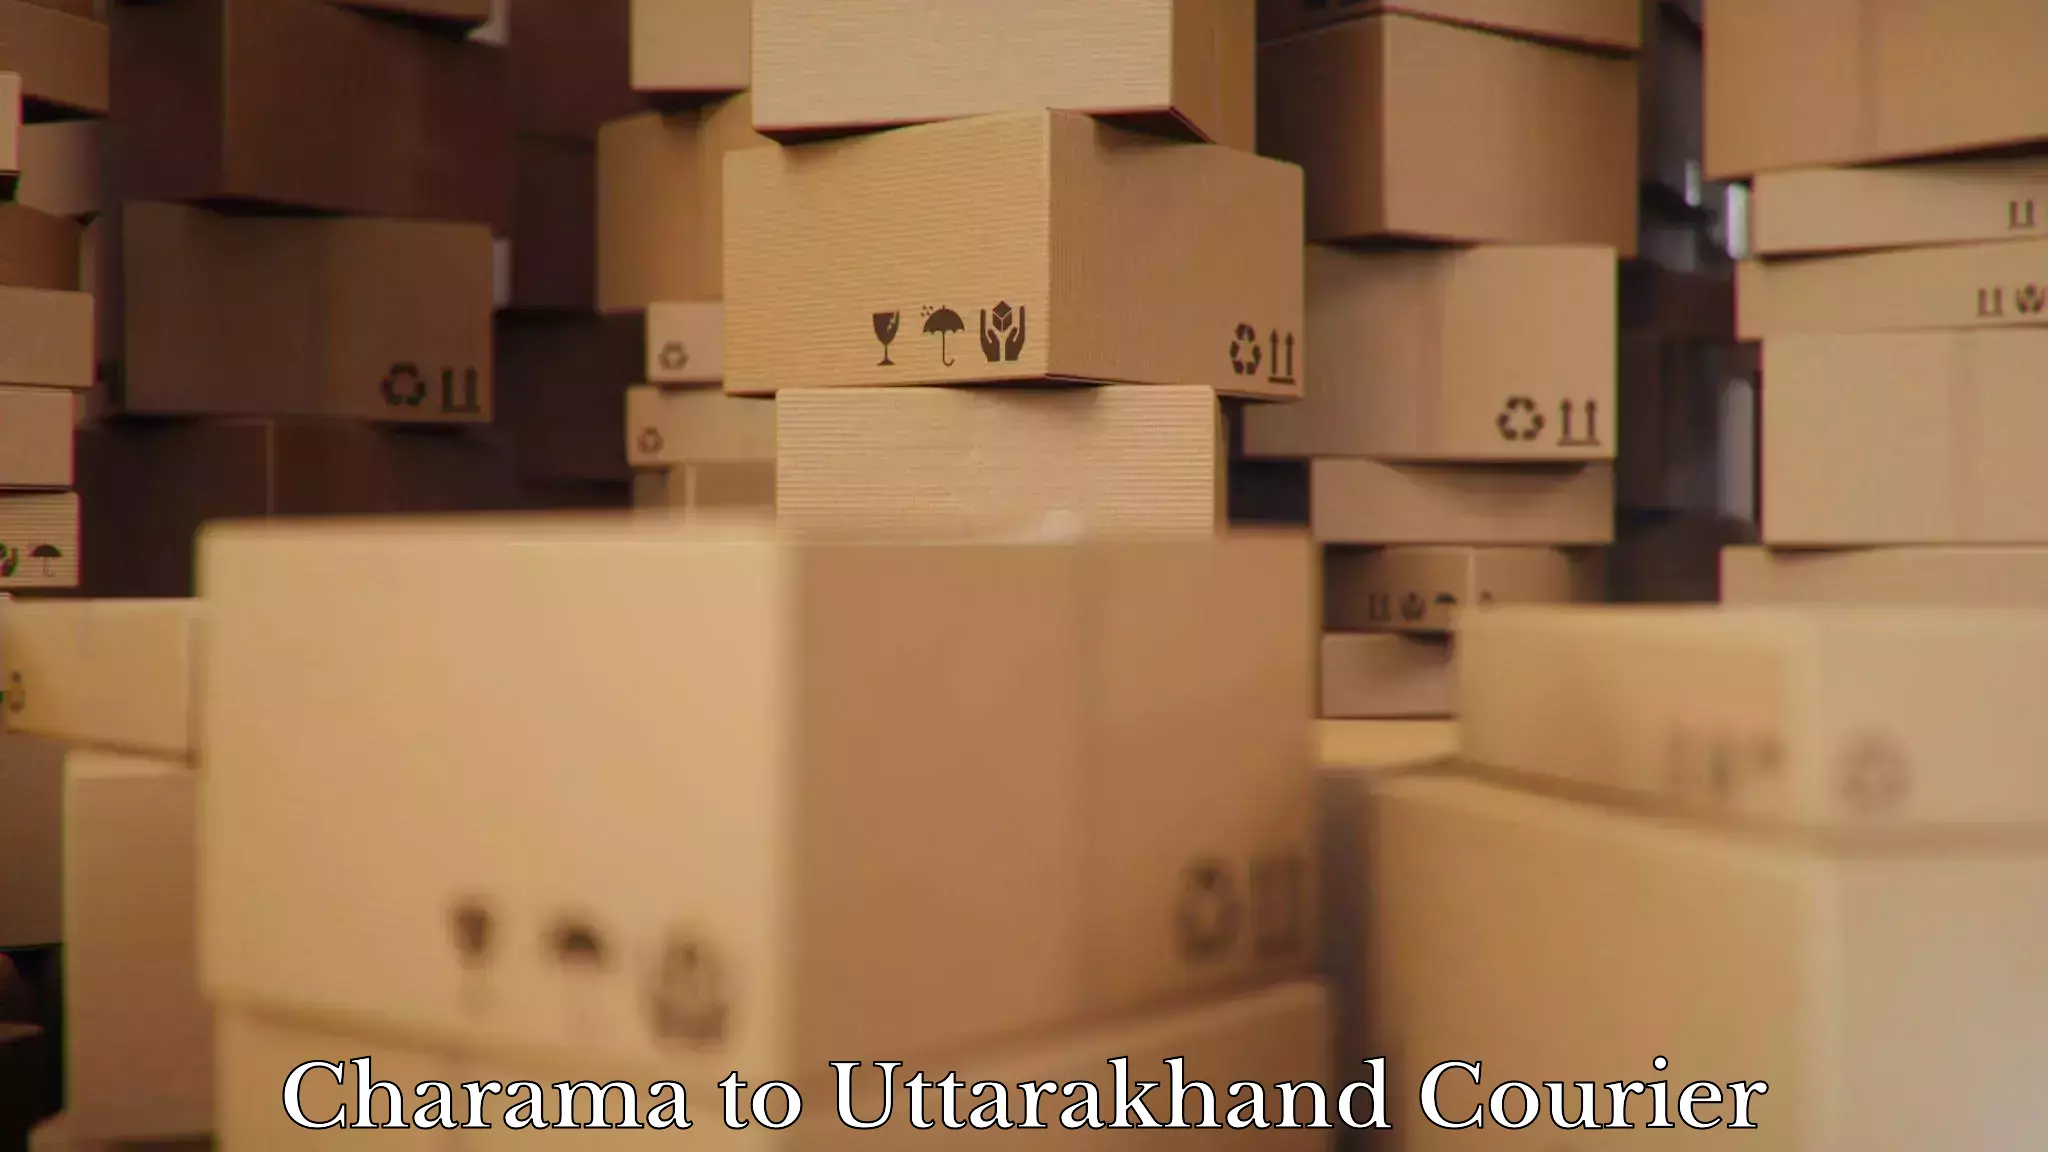 Furniture delivery service Charama to Uttarakhand